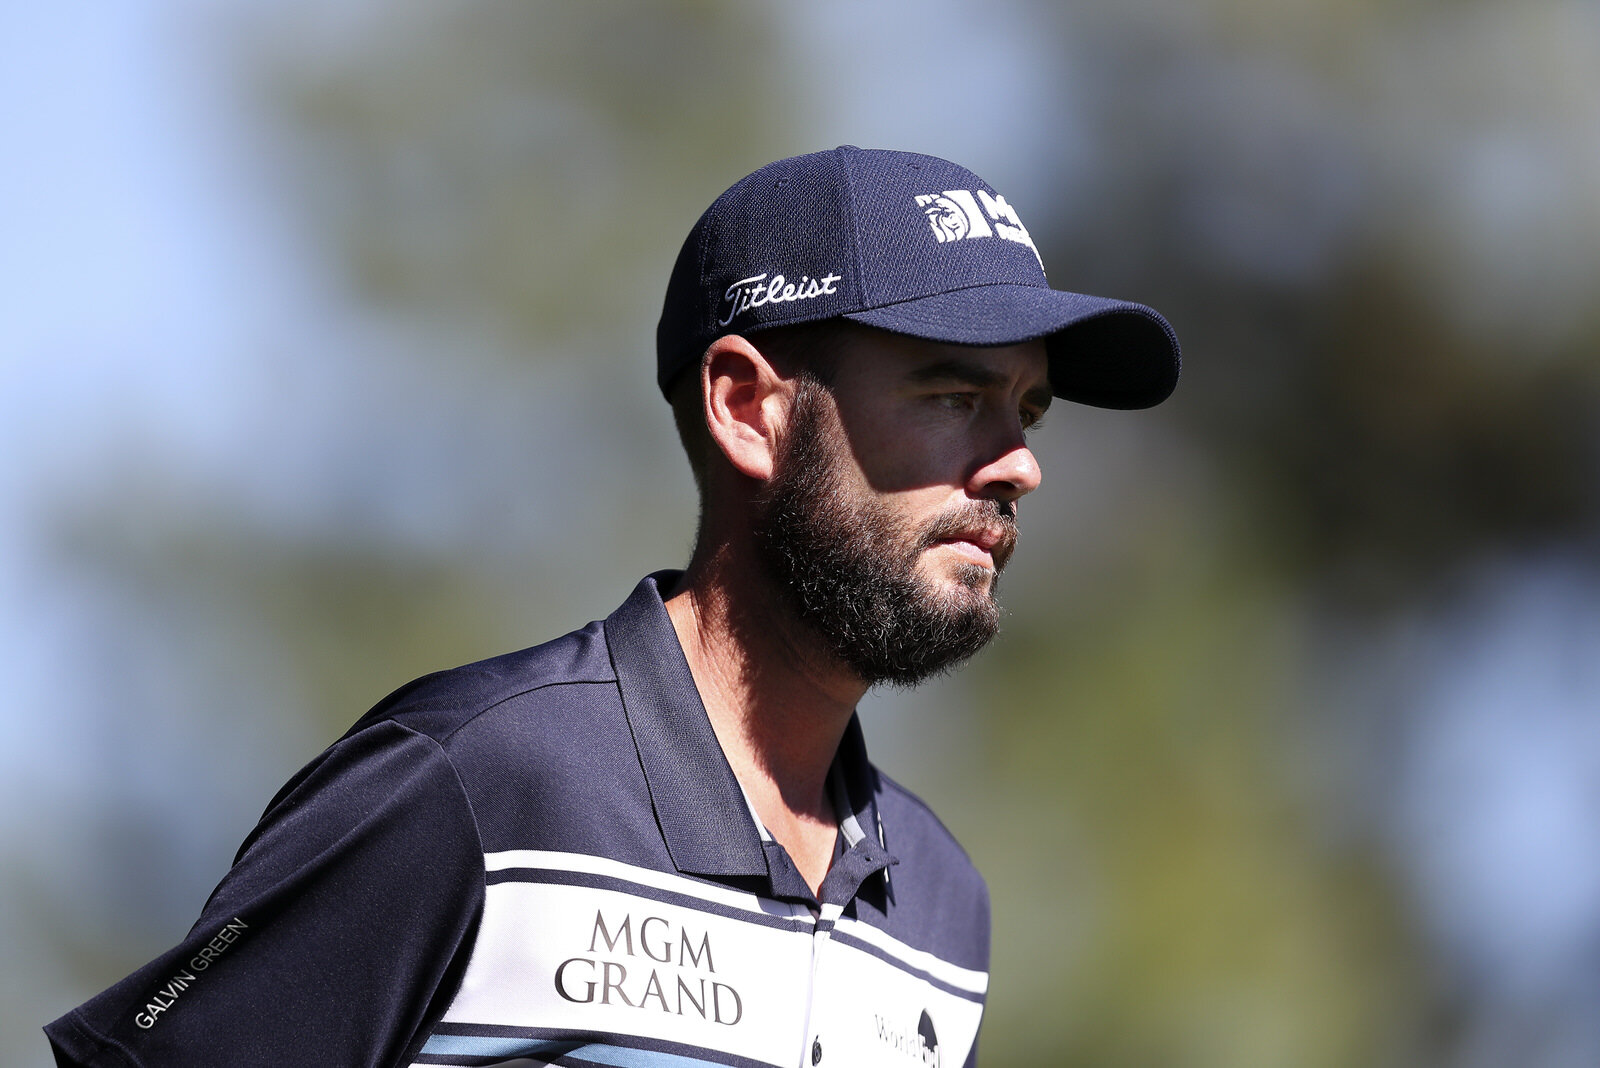  TRUCKEE, CALIFORNIA - AUGUST 01: Troy Merritt prepares to tee off on the sixth hole during the third round of the Barracuda Championship at Tahoe Mountain Club's Old Greenwood Golf Course on August 01, 2020 in Truckee, California. (Photo by Jed Jaco